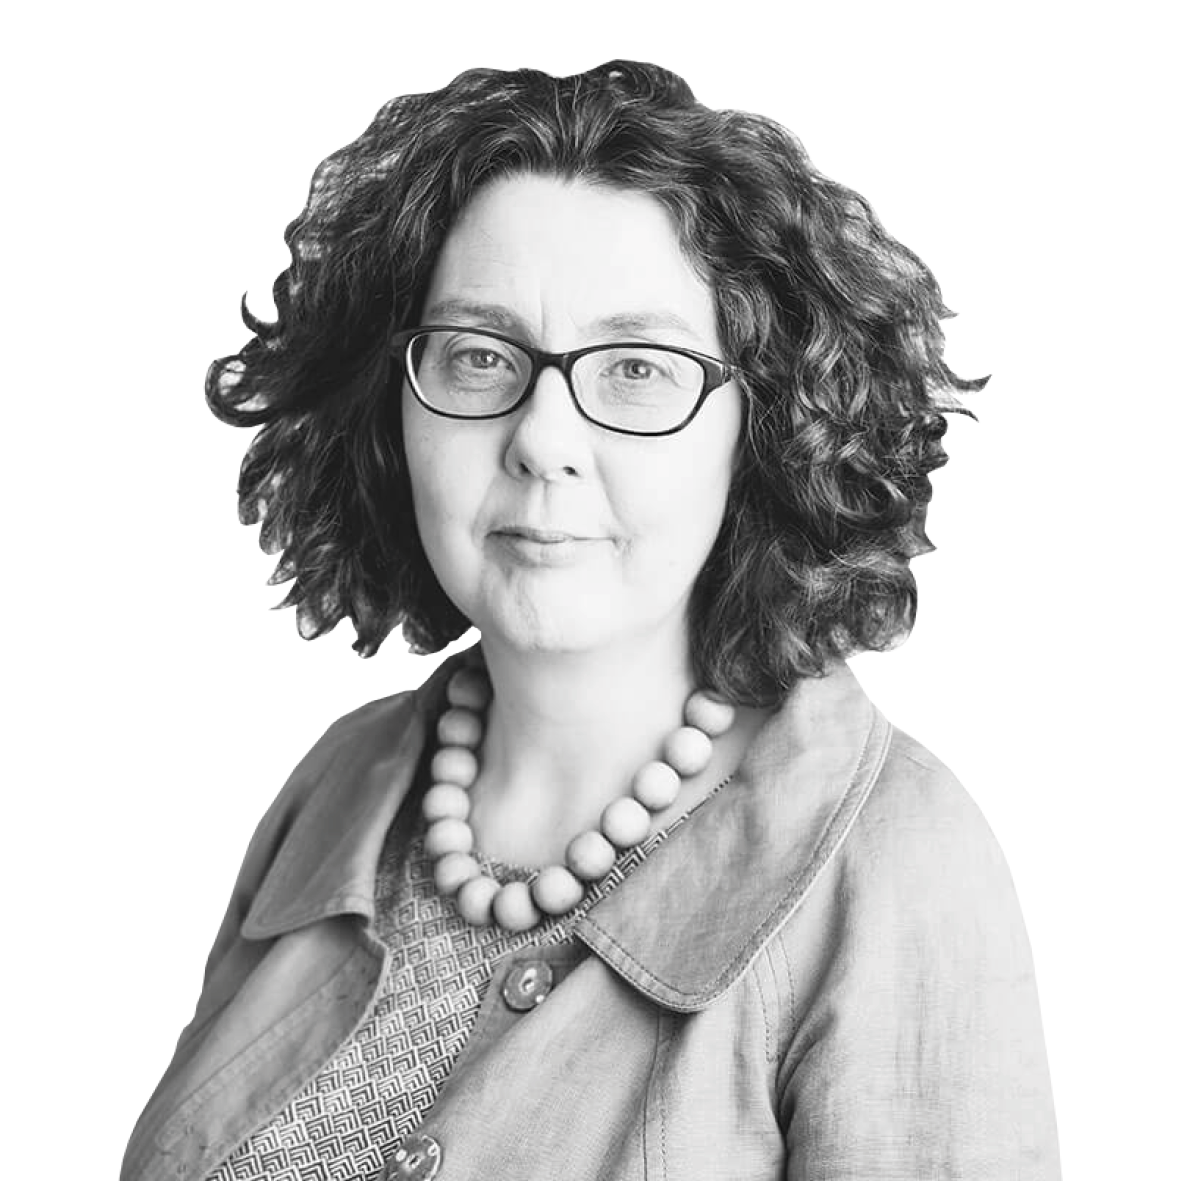 A black and white image of a person wearing glasses and a jacket with a string of large beads around their neck. They have dark curly hair to shoulder length